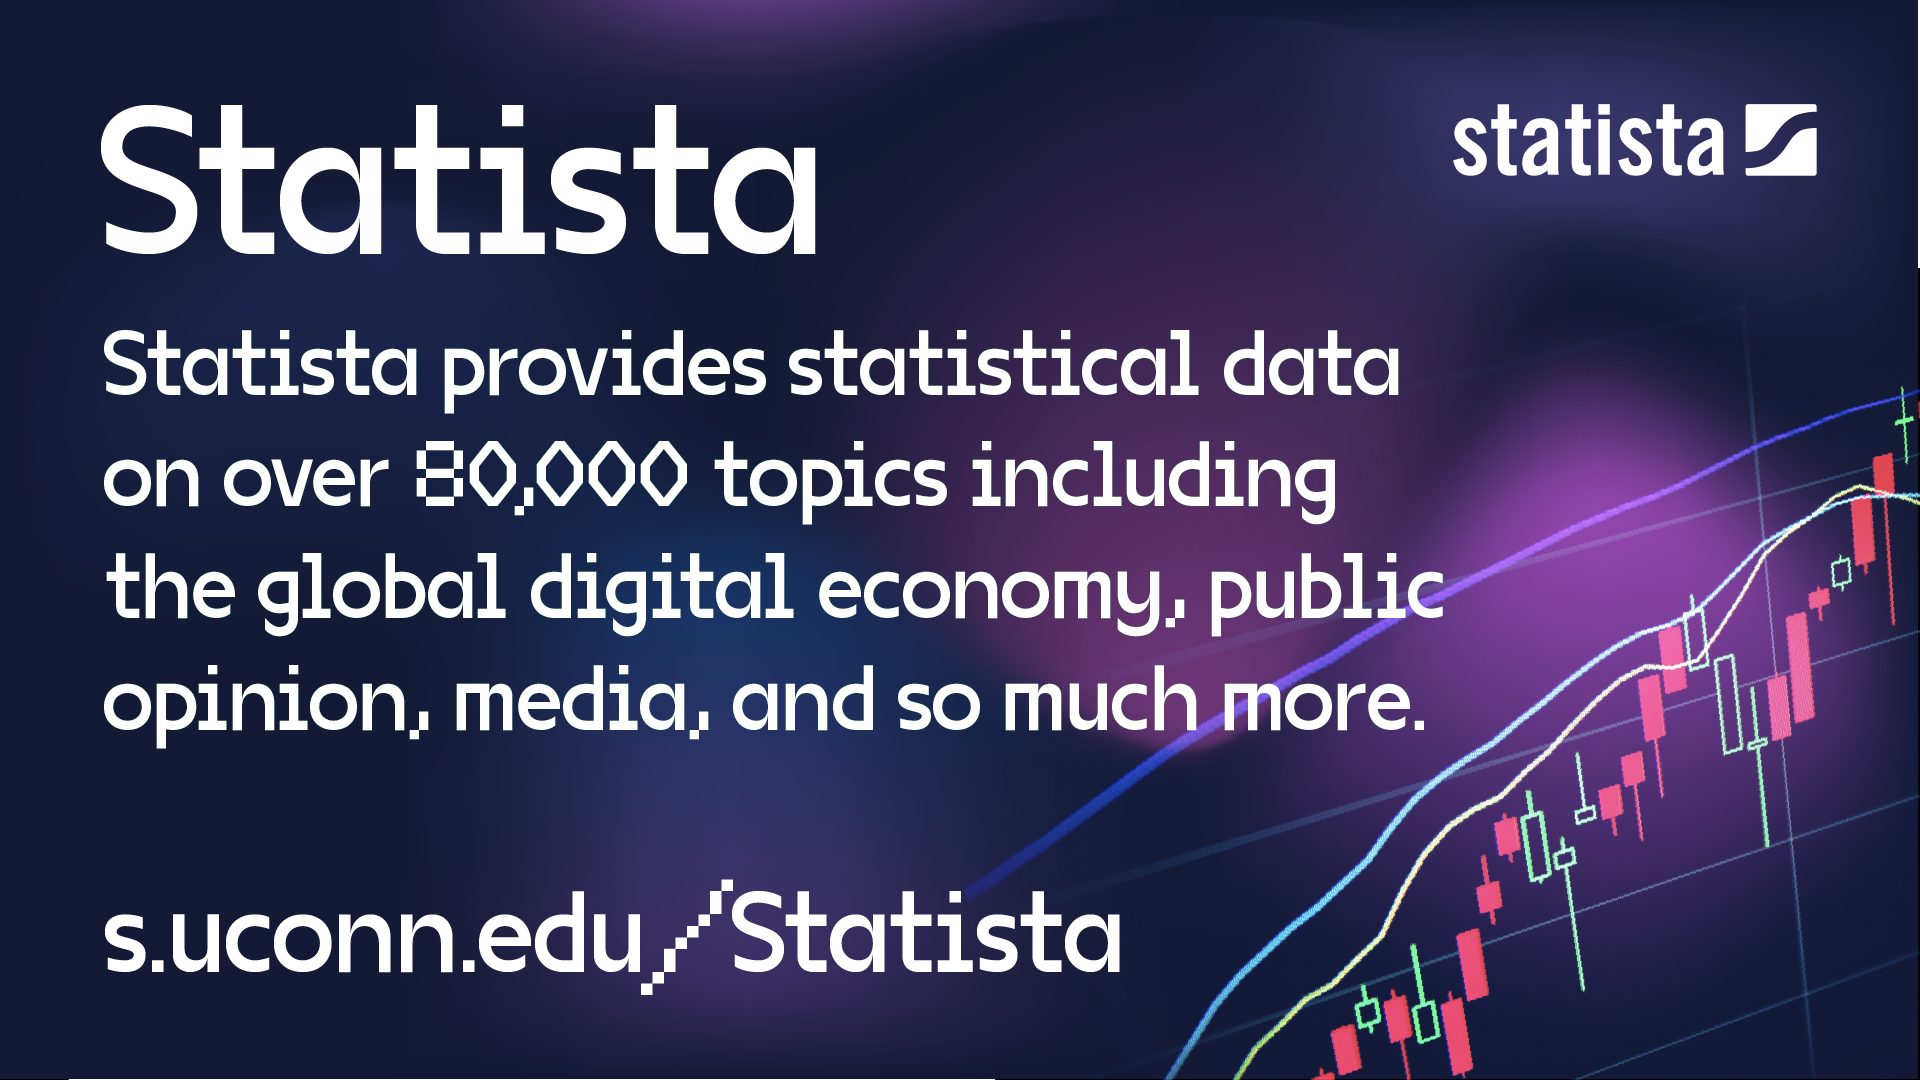 Statista provides statistical data on over 80,000 topics including the global digital economy, public opinion, media, and so much more. s.uconn.edu/statista